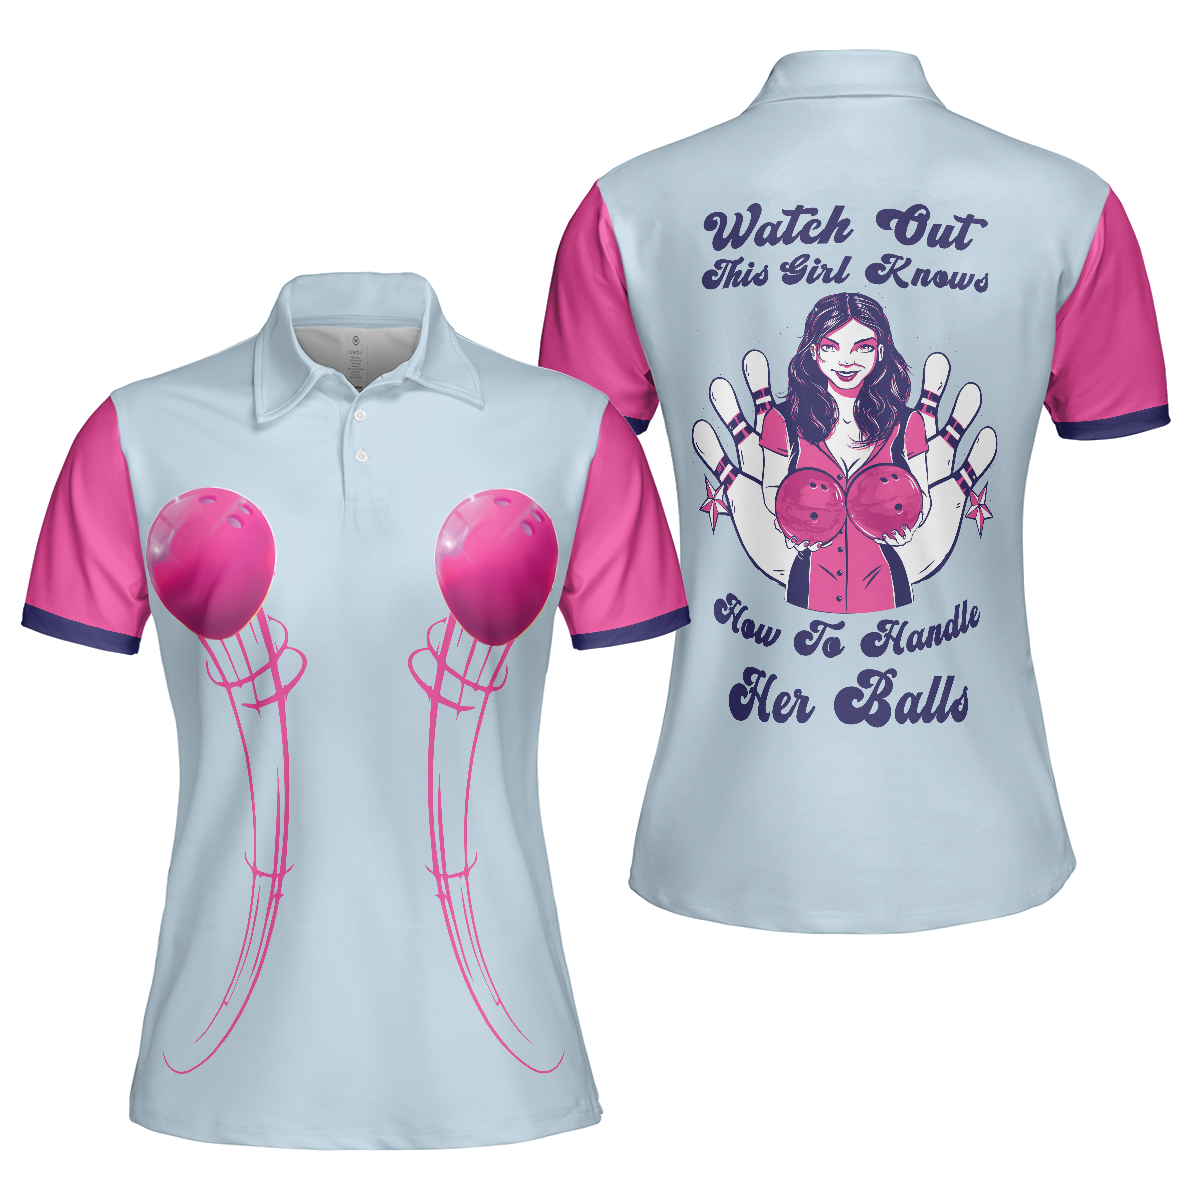 Bowling Women Polo Shirt, Watch Out This Girl Knows Short Sleeve Women Polo Shirt - Perfect Gift For Women, Bowlers